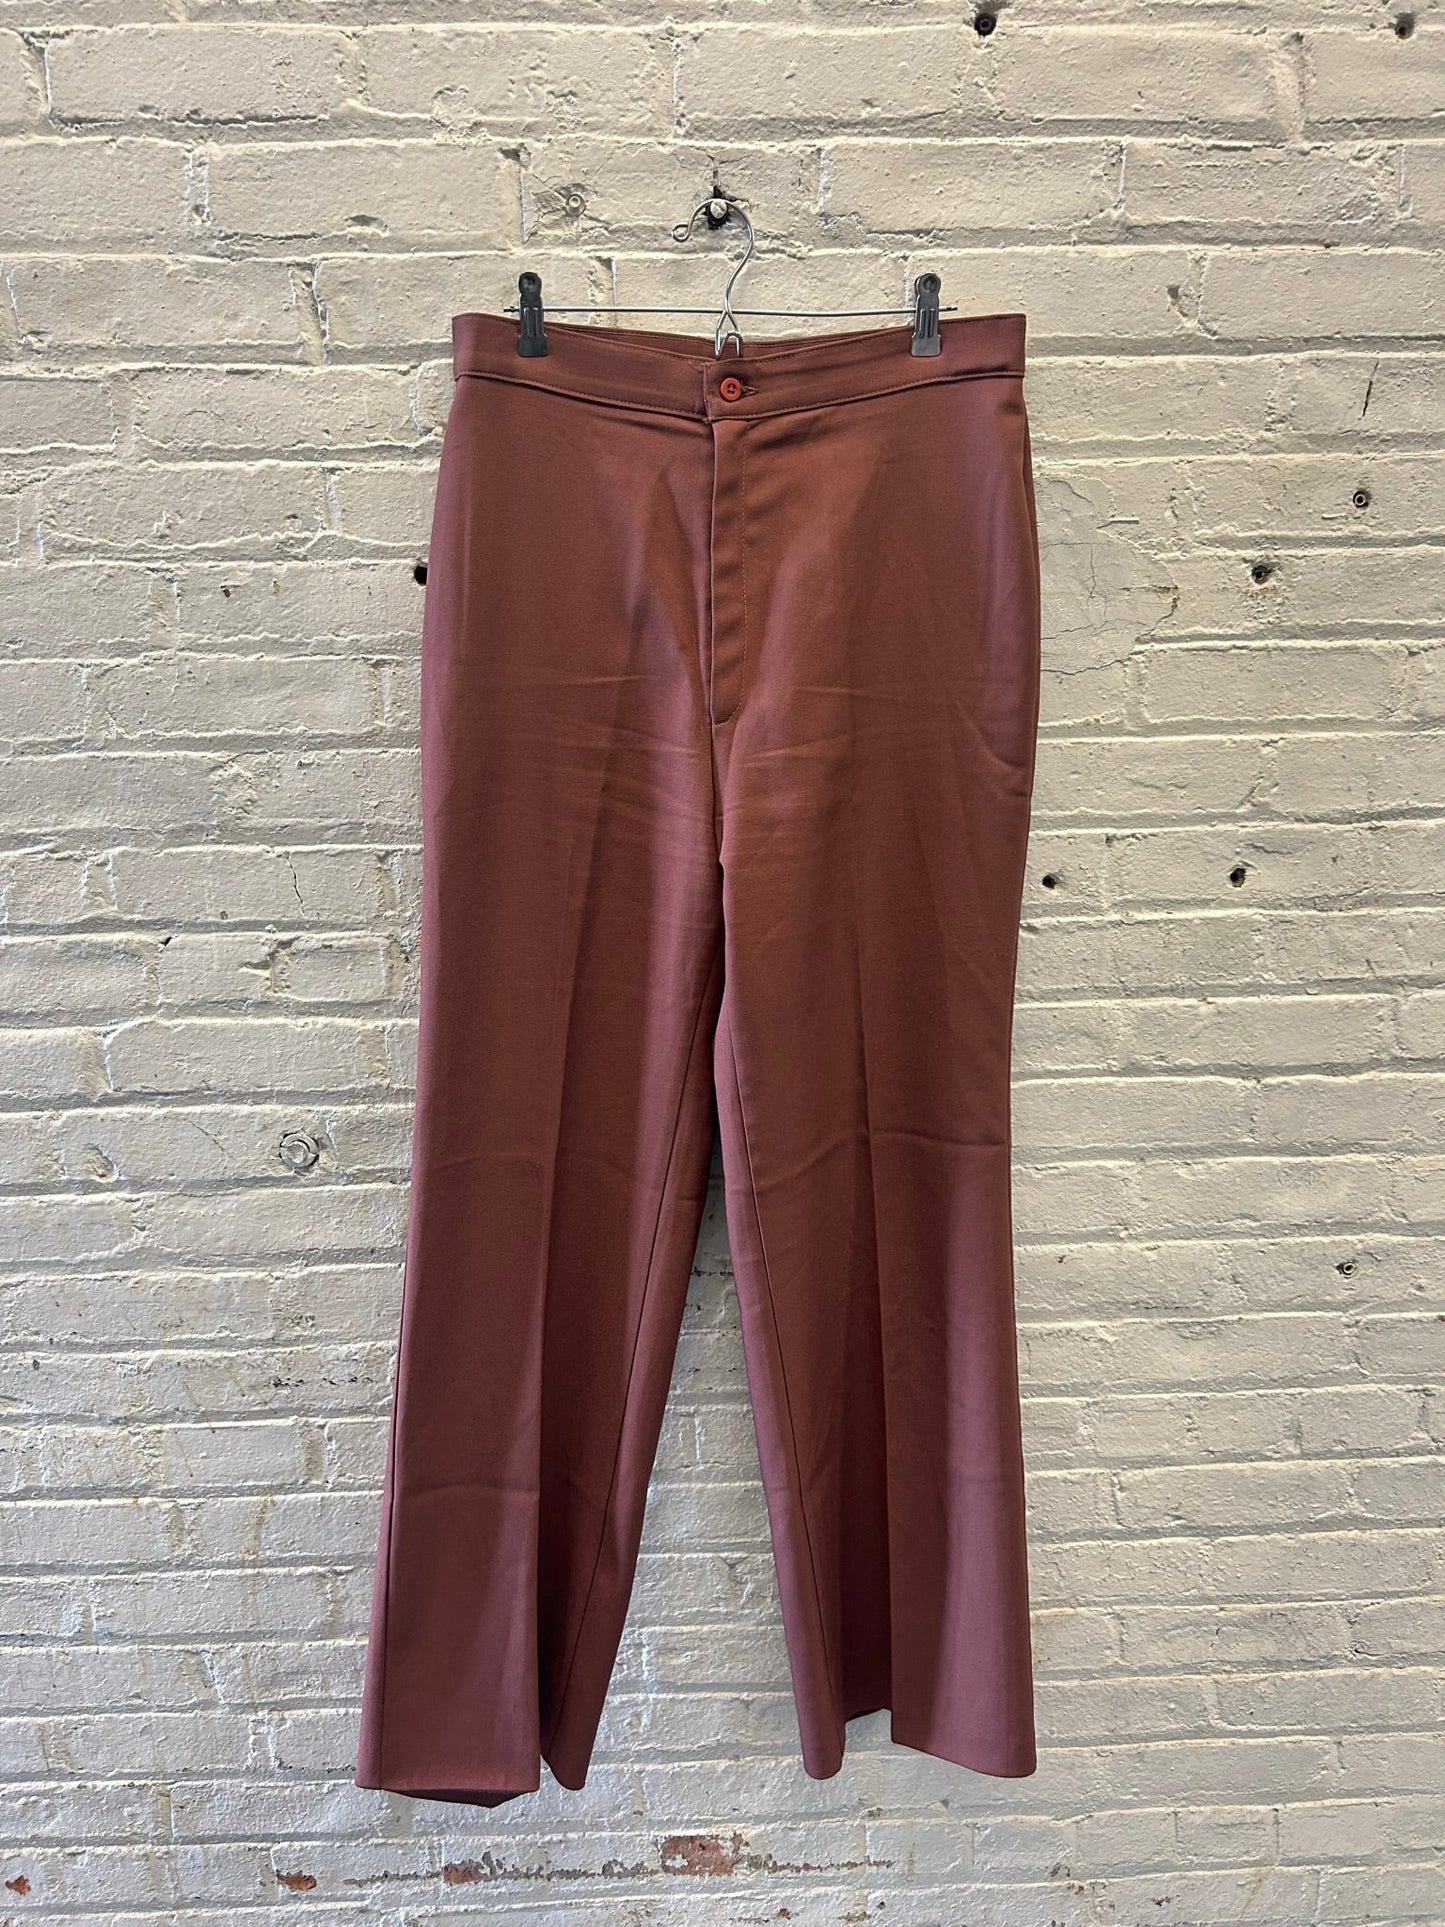 Polyester Levi's Flare Pants